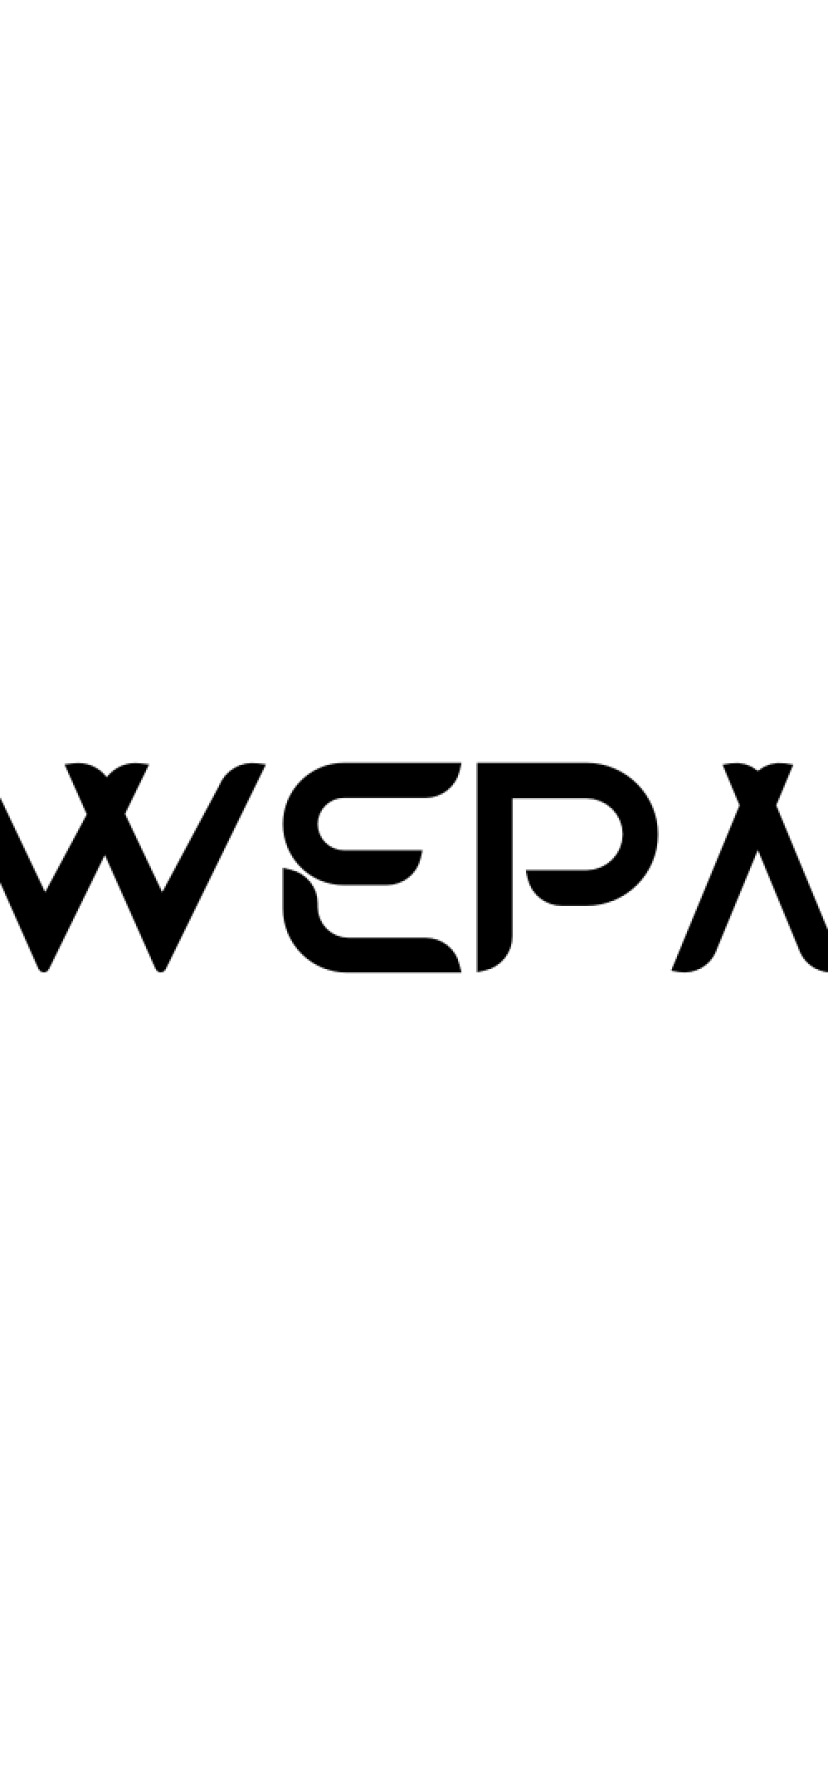 Wepa.co domain name for sale